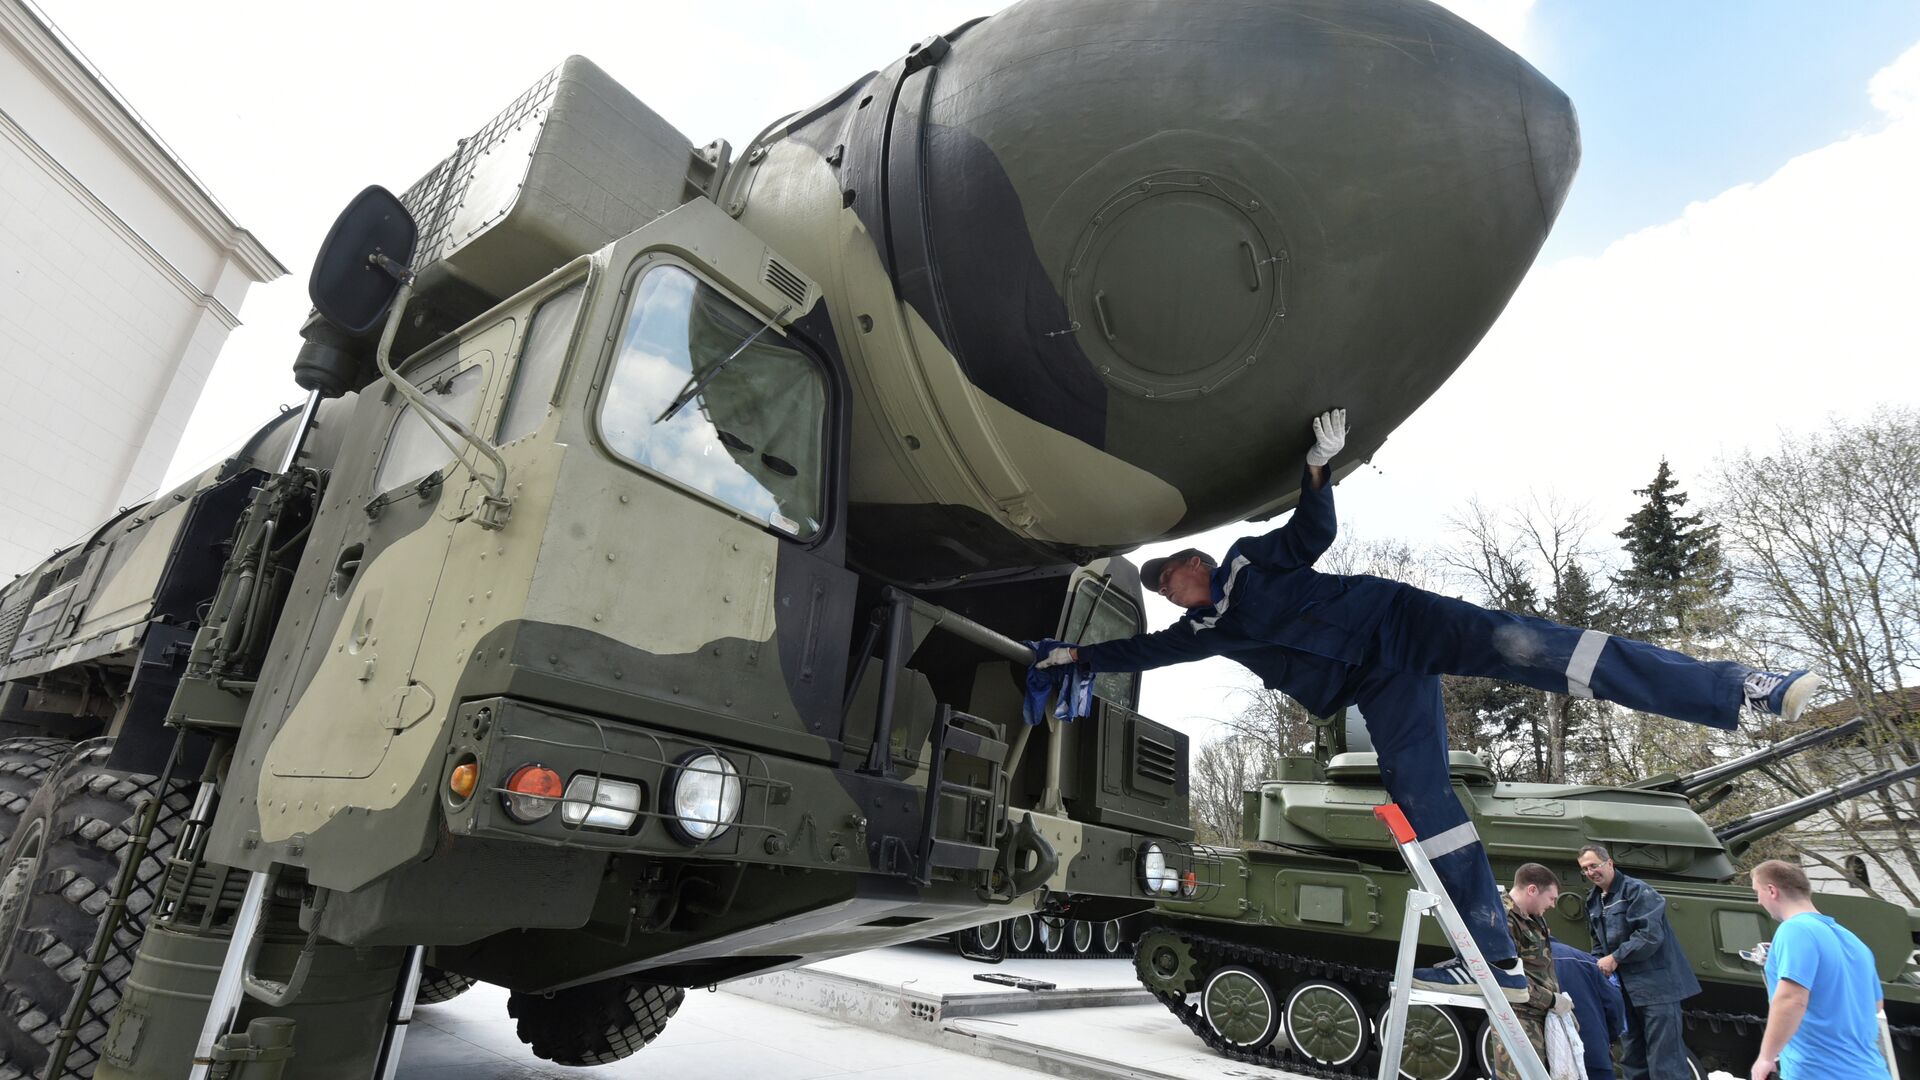 An employee cleans a Topol-M intercontinental ballistic missile launcher at an open-air military exhibition in Moscow on April 29, 2015 - Sputnik International, 1920, 19.01.2022